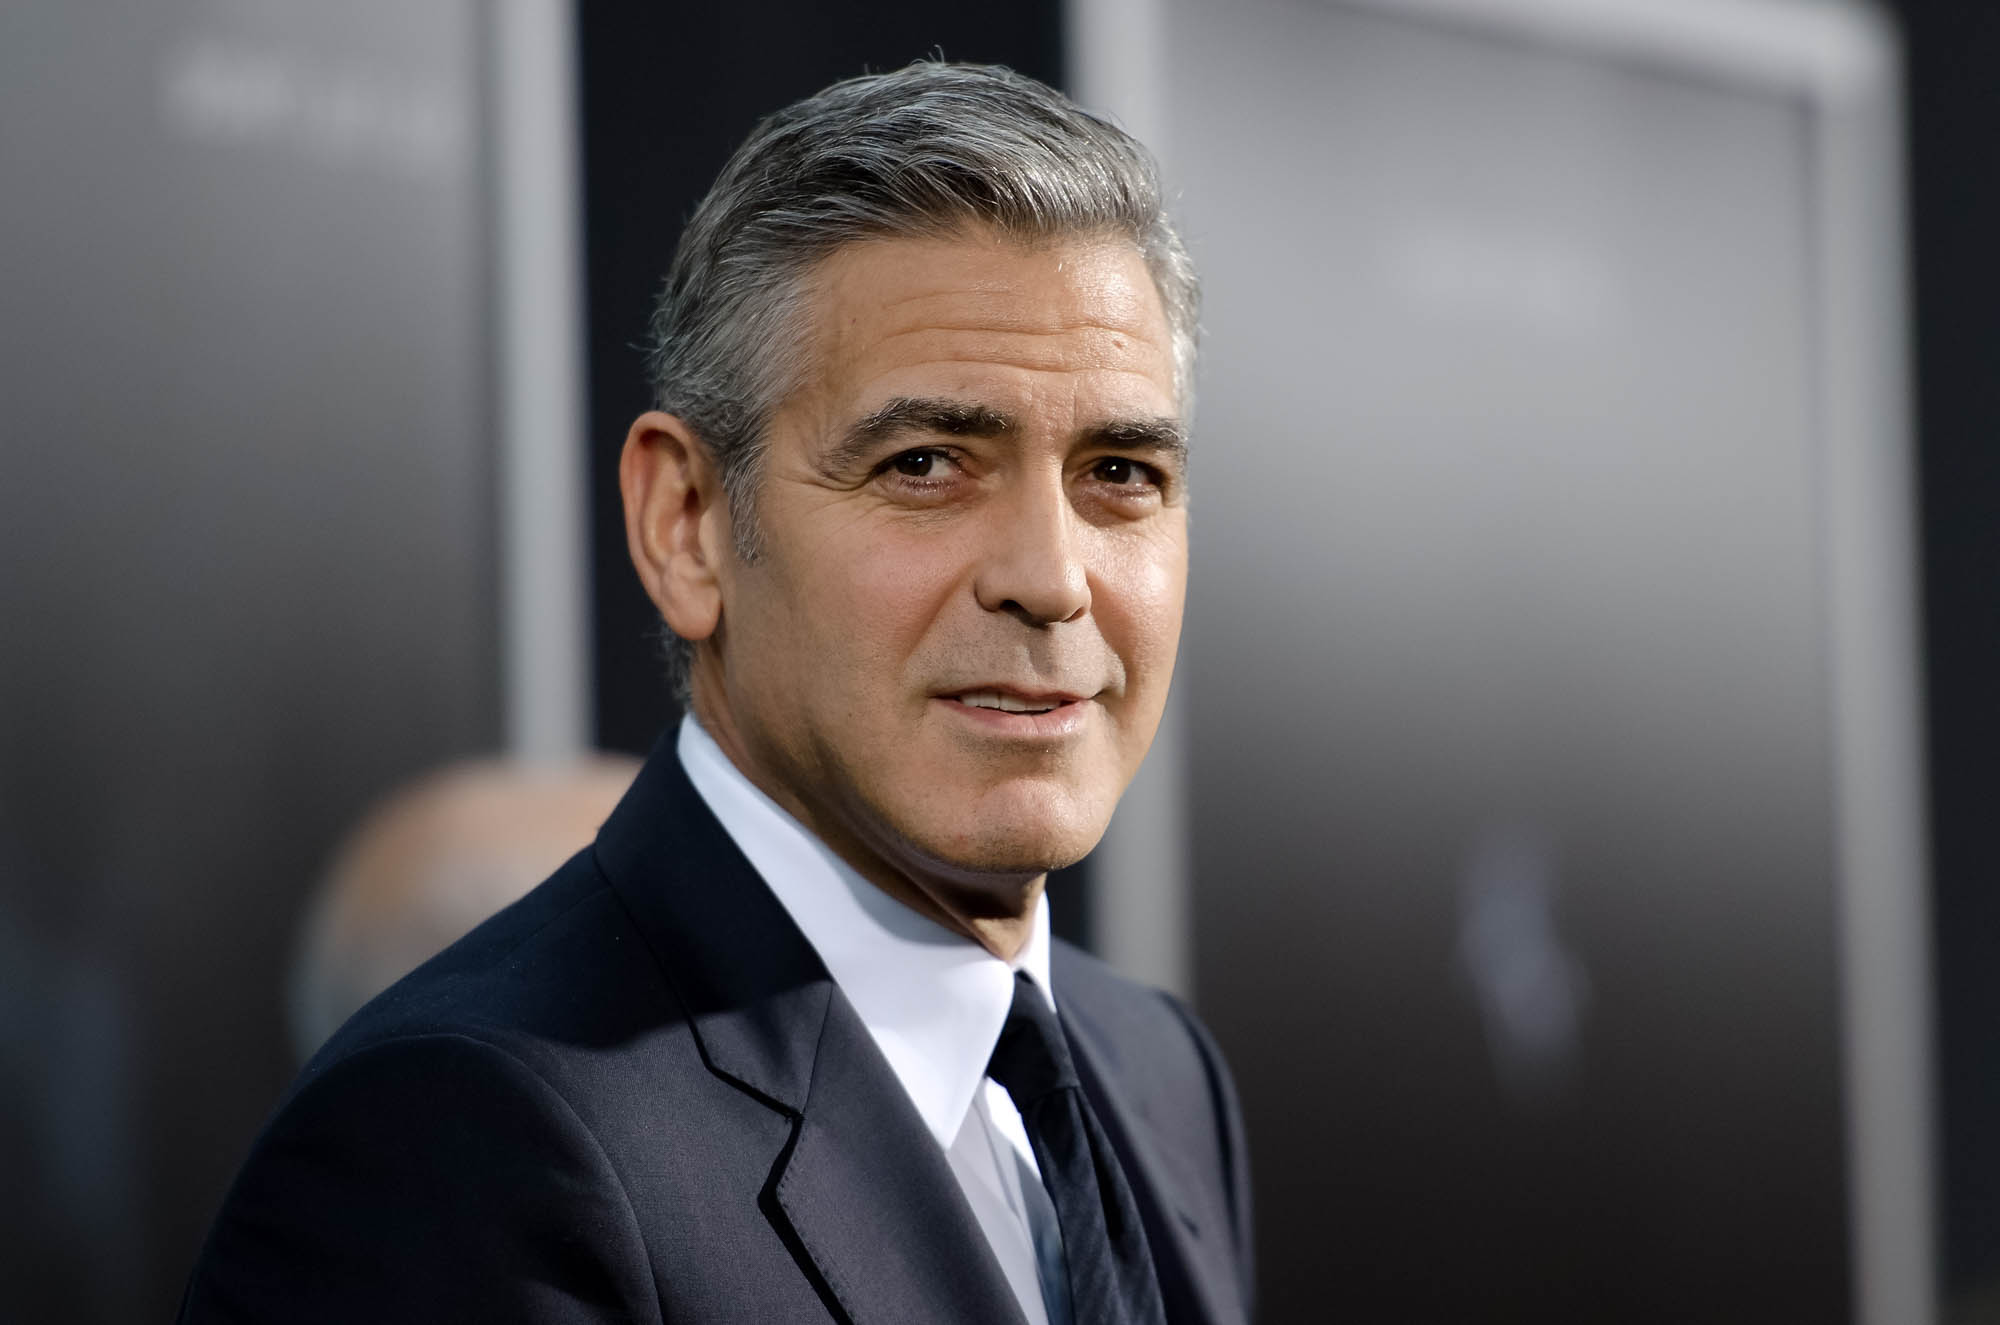 George Clooney happy to look his age with salt and pepper hair